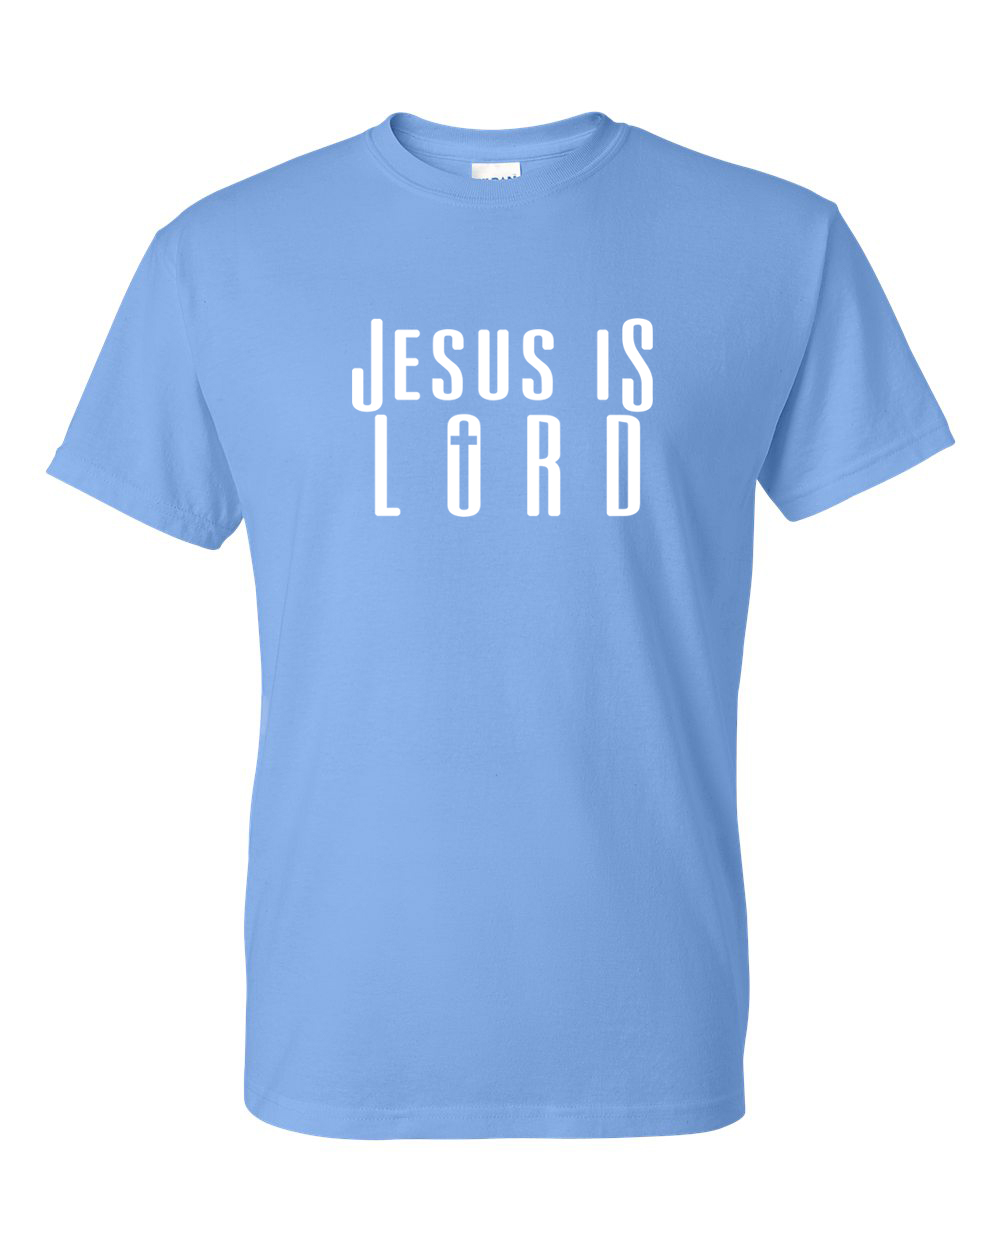 Jesus is Lord and Safety is of The Lord - Carolina Blue with Pure White